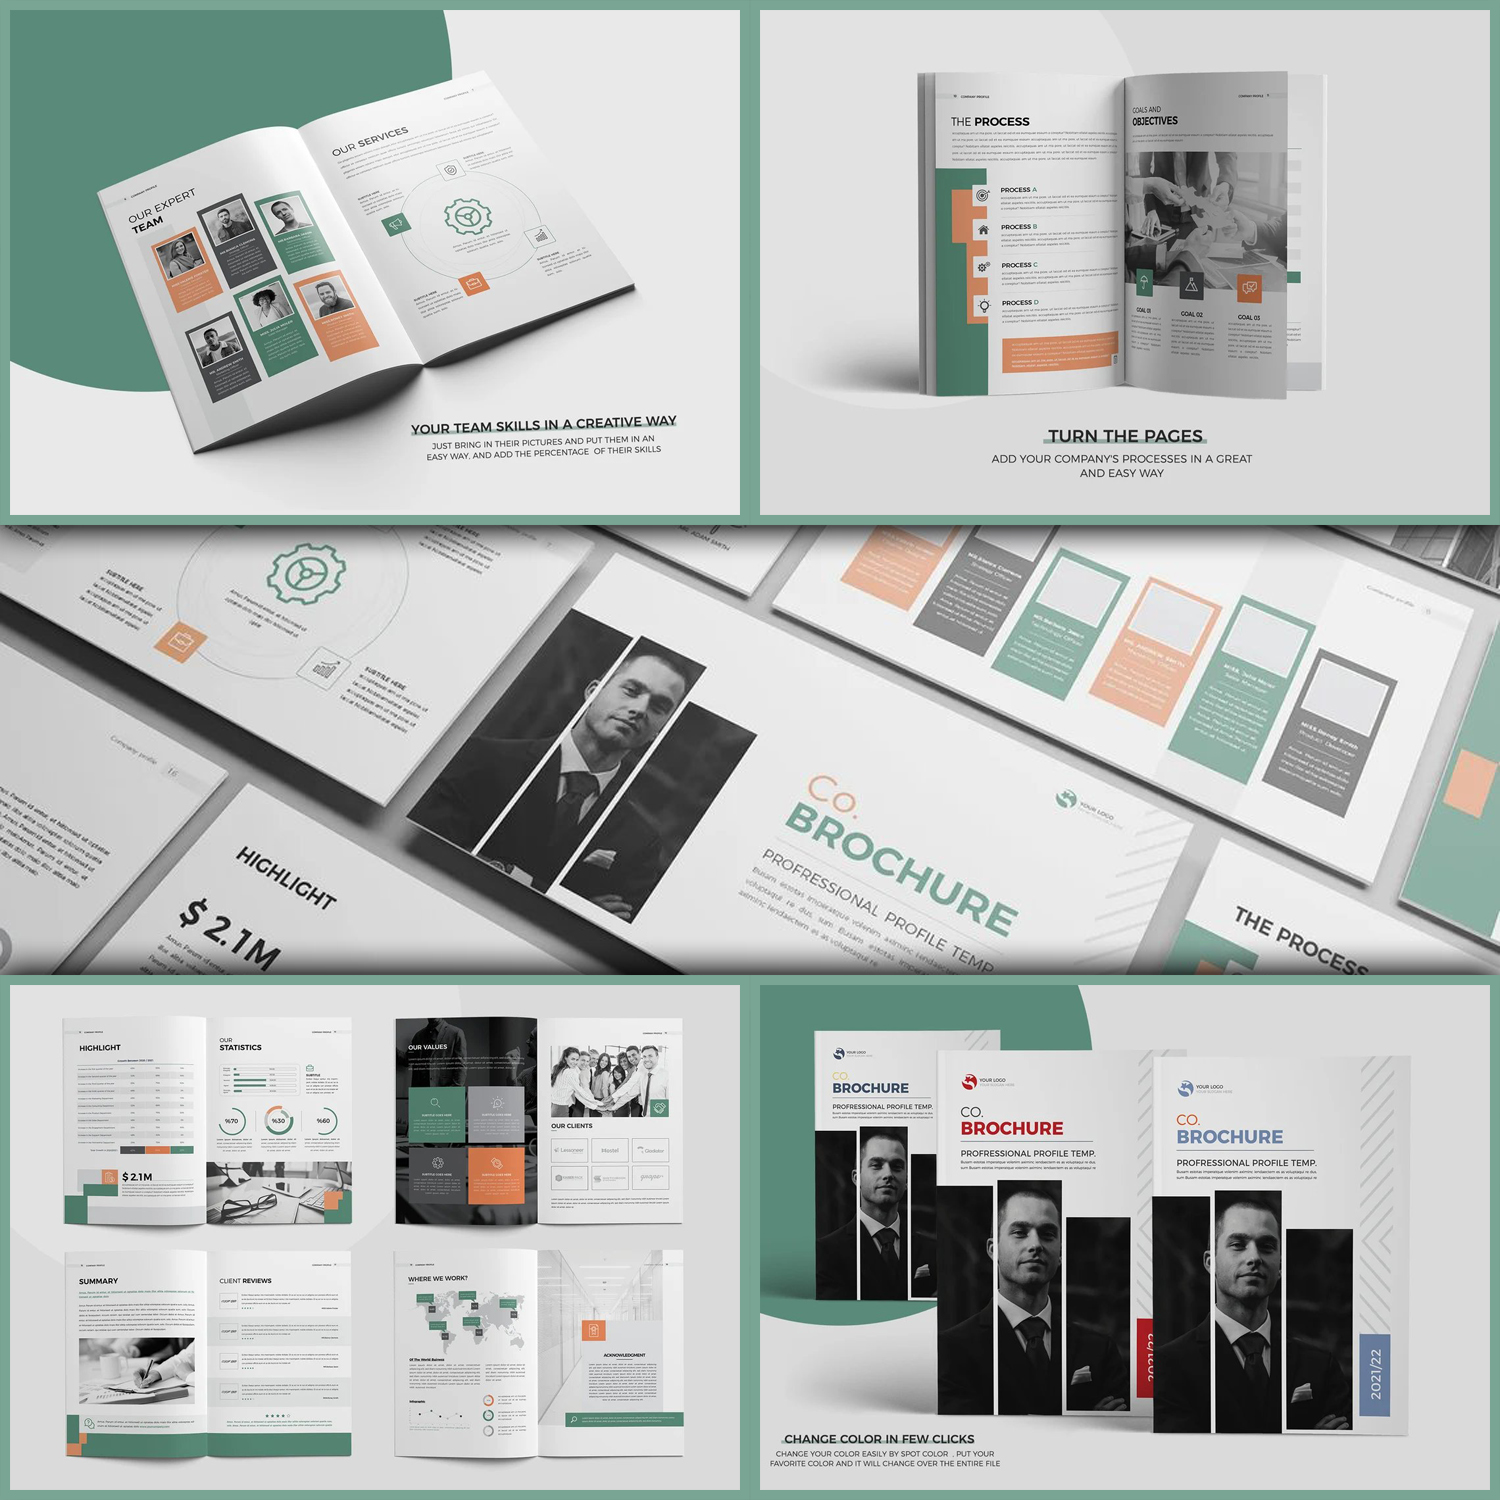 PPT & Docx Brochure Template, 20 Pages cover.